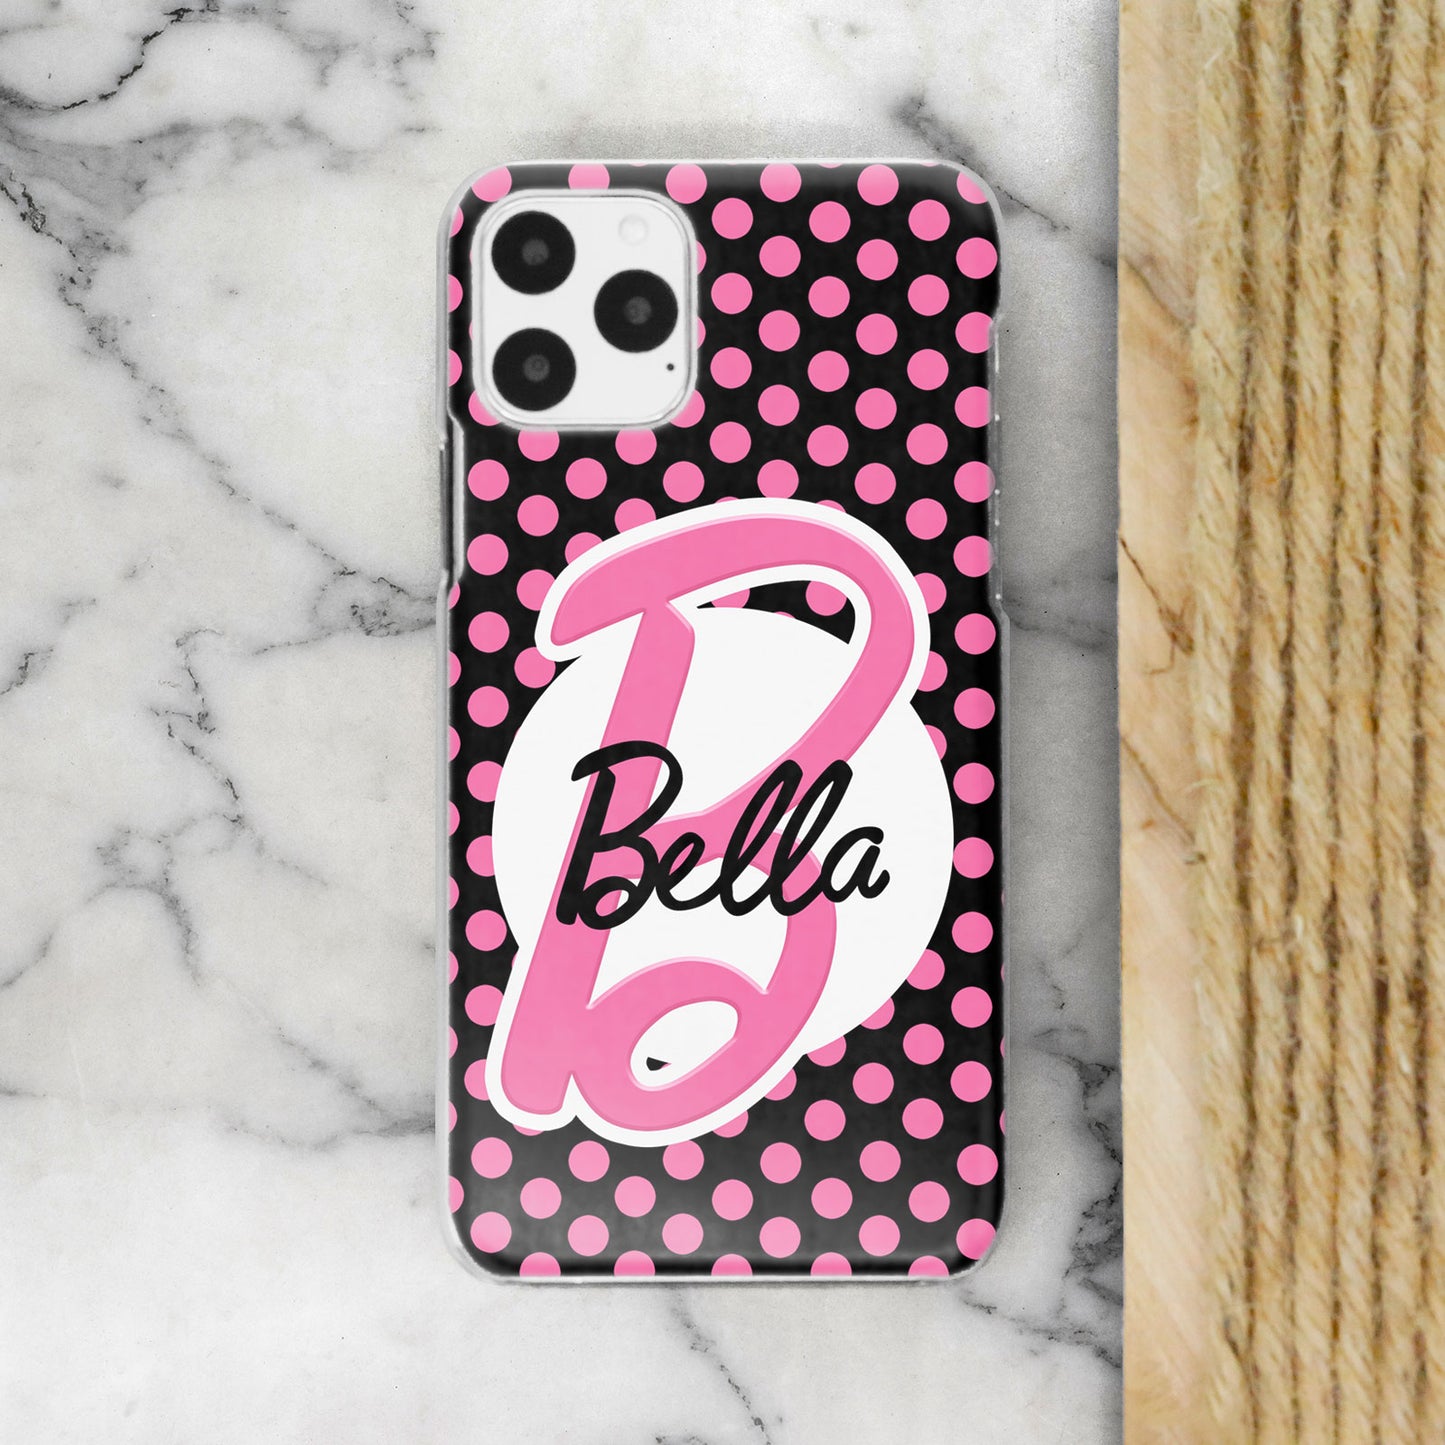 Personalised Barbie Inspired iPhone Case - Pink and Black Polka with Initial/Name